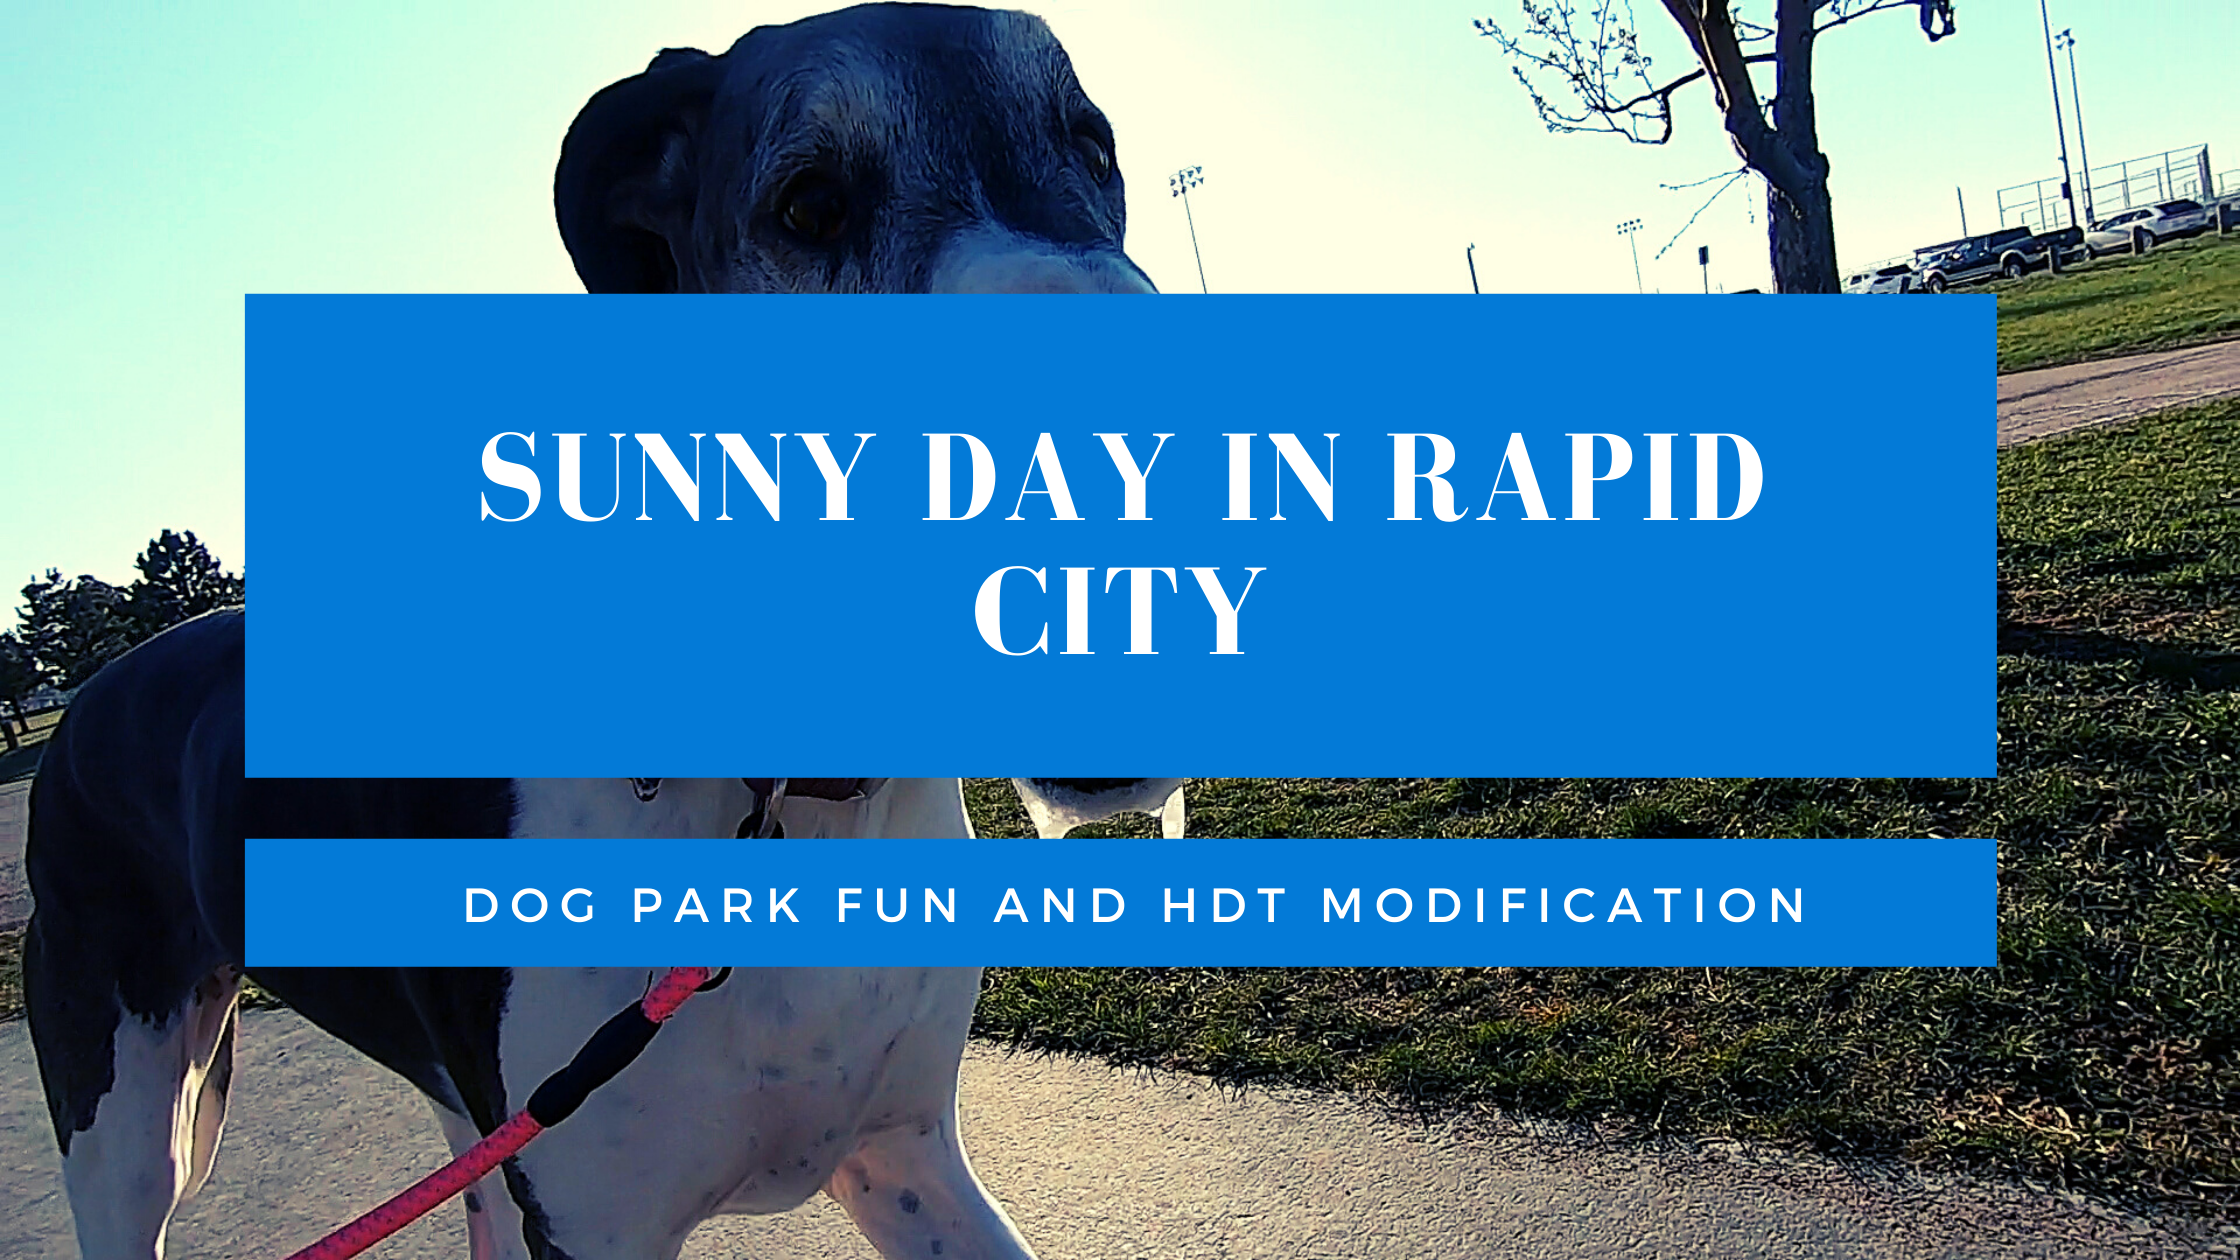 Sunny Day in Rapid City